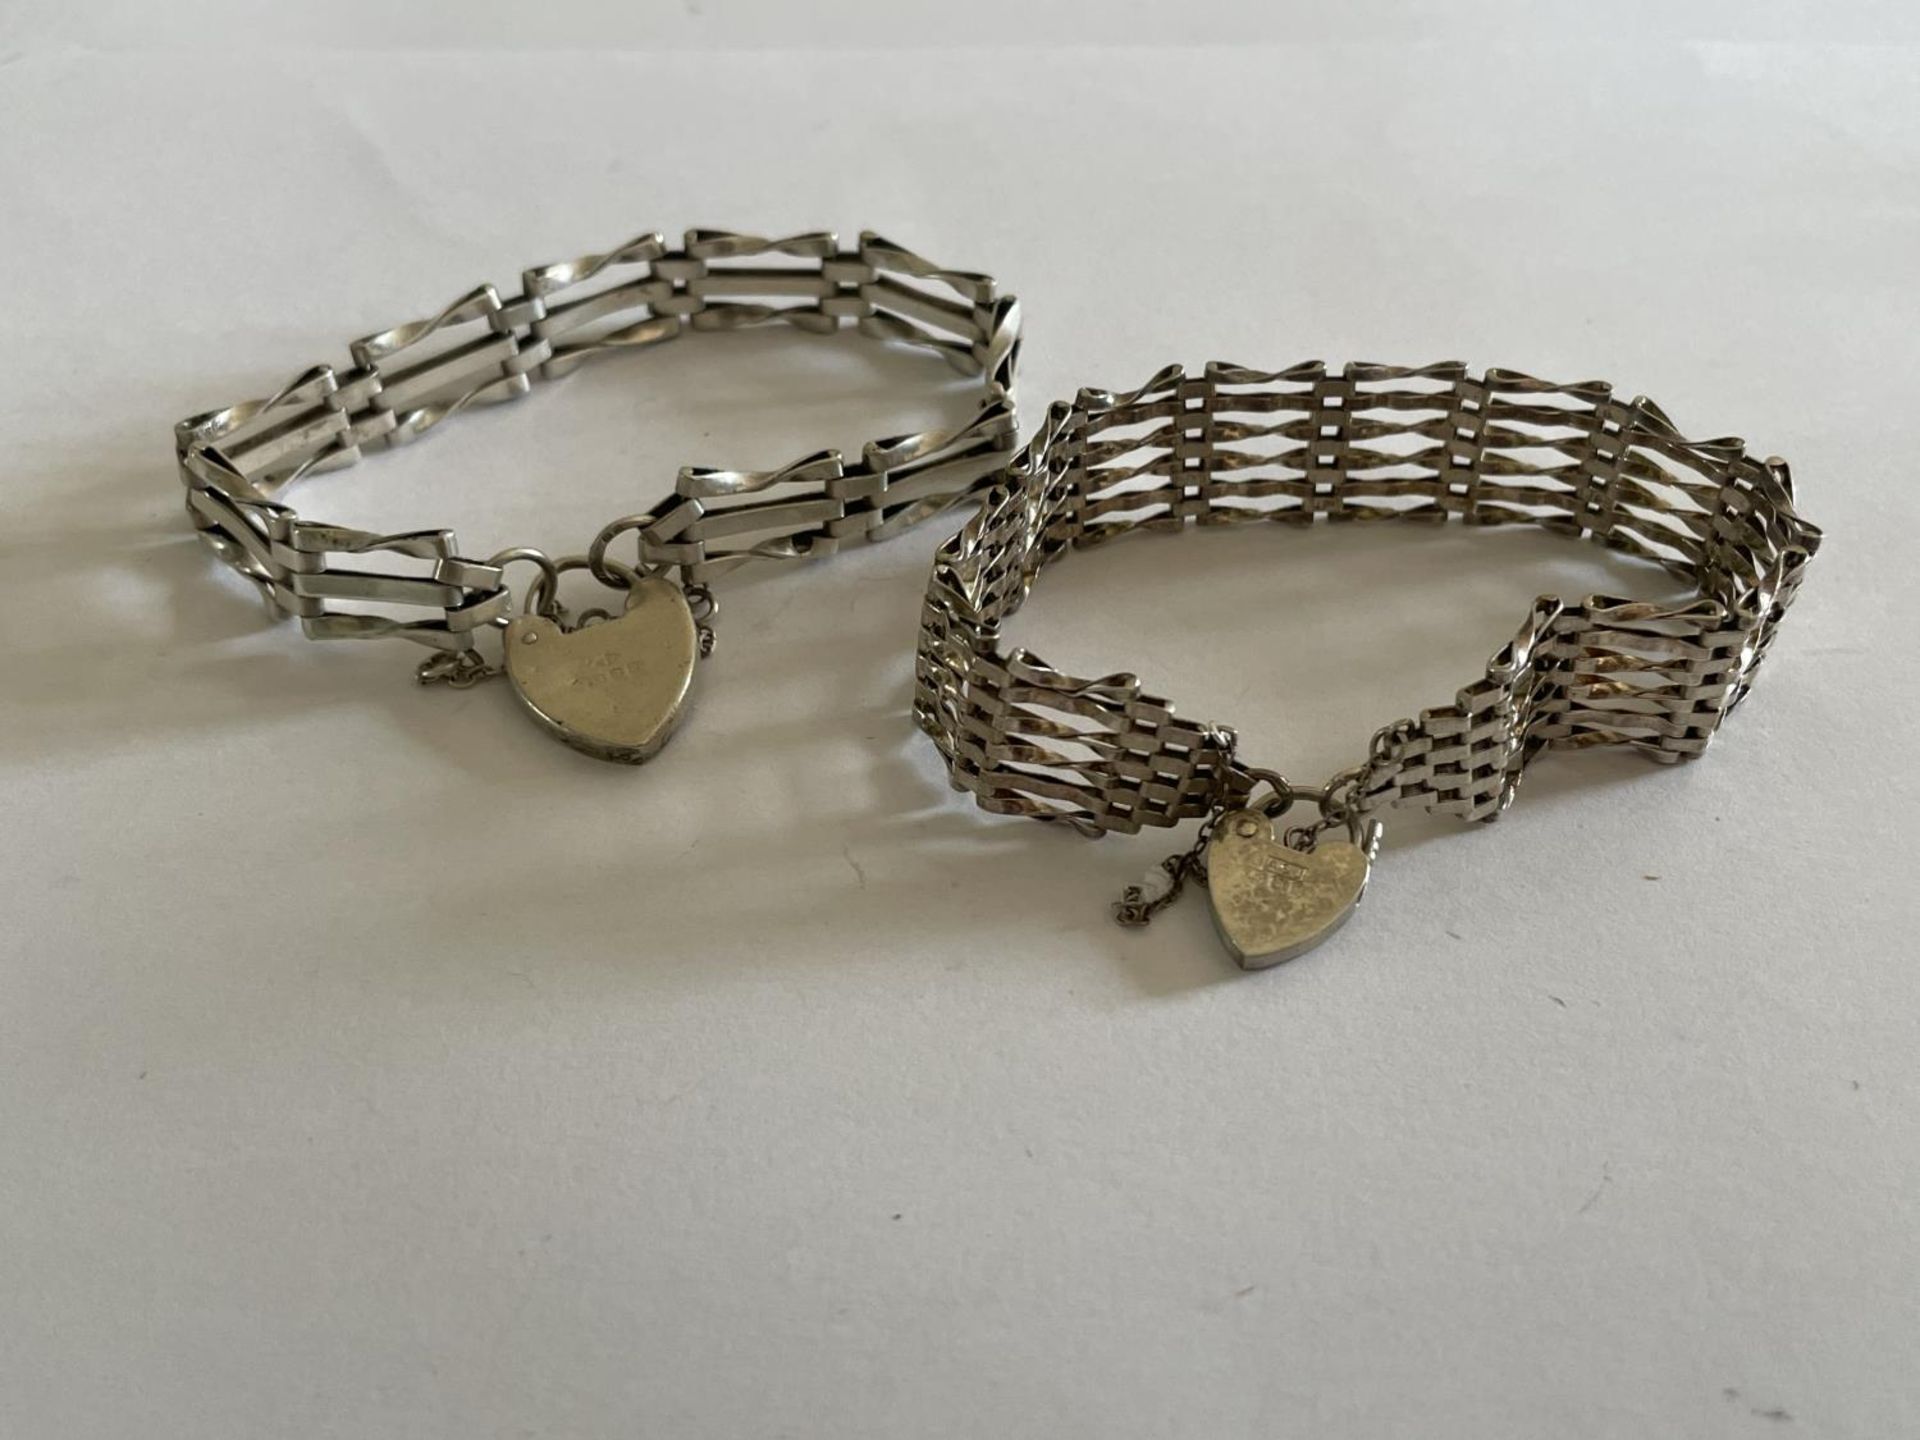 TWO SILVER GATE BRACELETS ONE SIX BAR AND ONE THREE